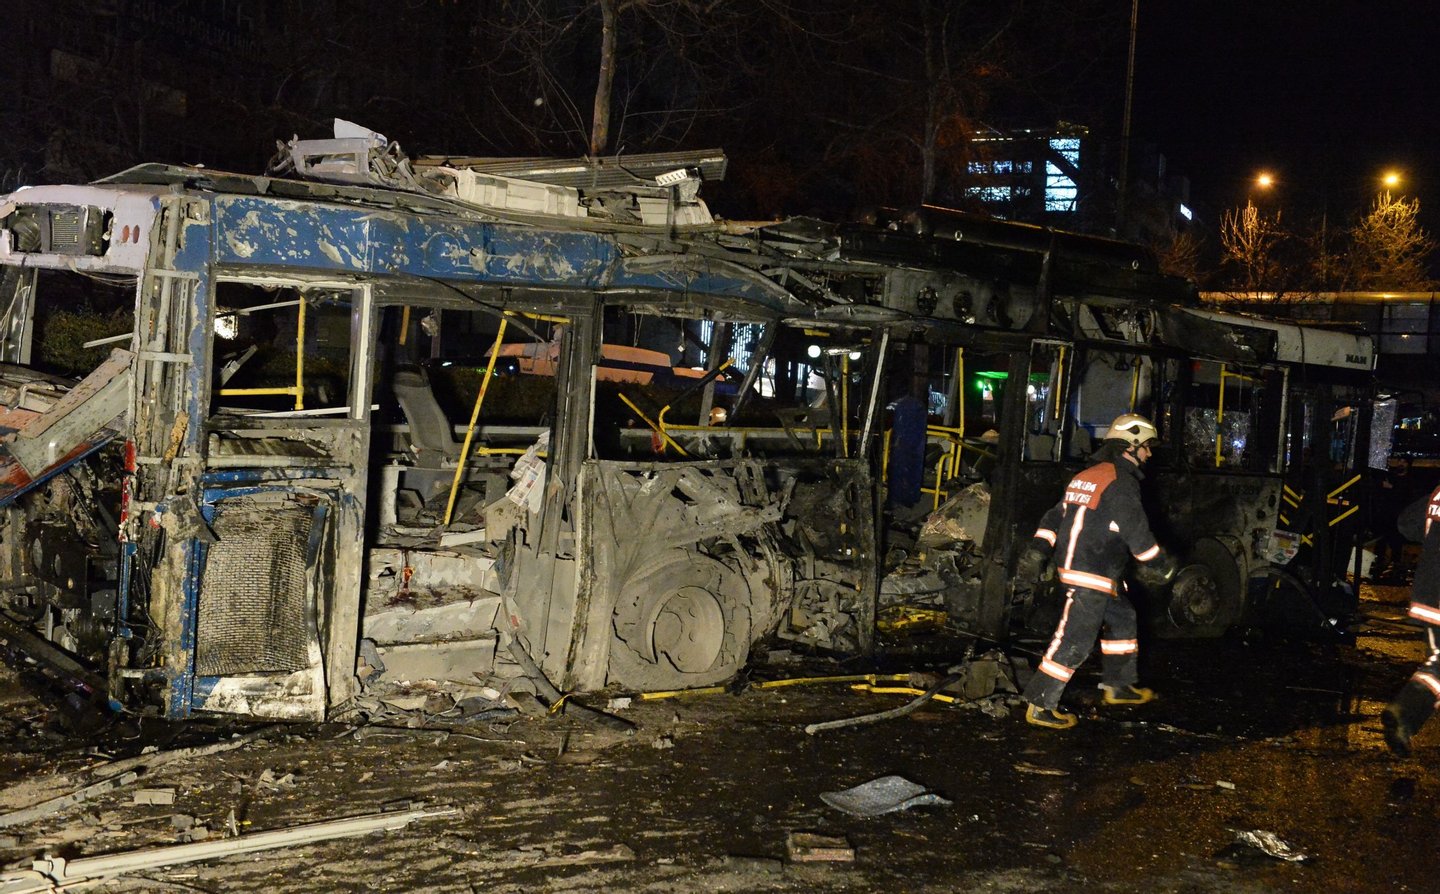 ANKARA, TURKEY - MARCH 13: The wreckage of a bus is seen after an explosion in Ankara's central Kizilay district on March 13, 2016 in Ankara, Turkey. The Ankara governor's office has reported that at least 27 people have been killed and 75 wounded in an explosion in the Turkish capital Ankara. The explosion is believed to have been a car bomb attack according to Ankara governor Mehmet Kiliclar. (Photo by Defne Karadeniz/Getty Images)